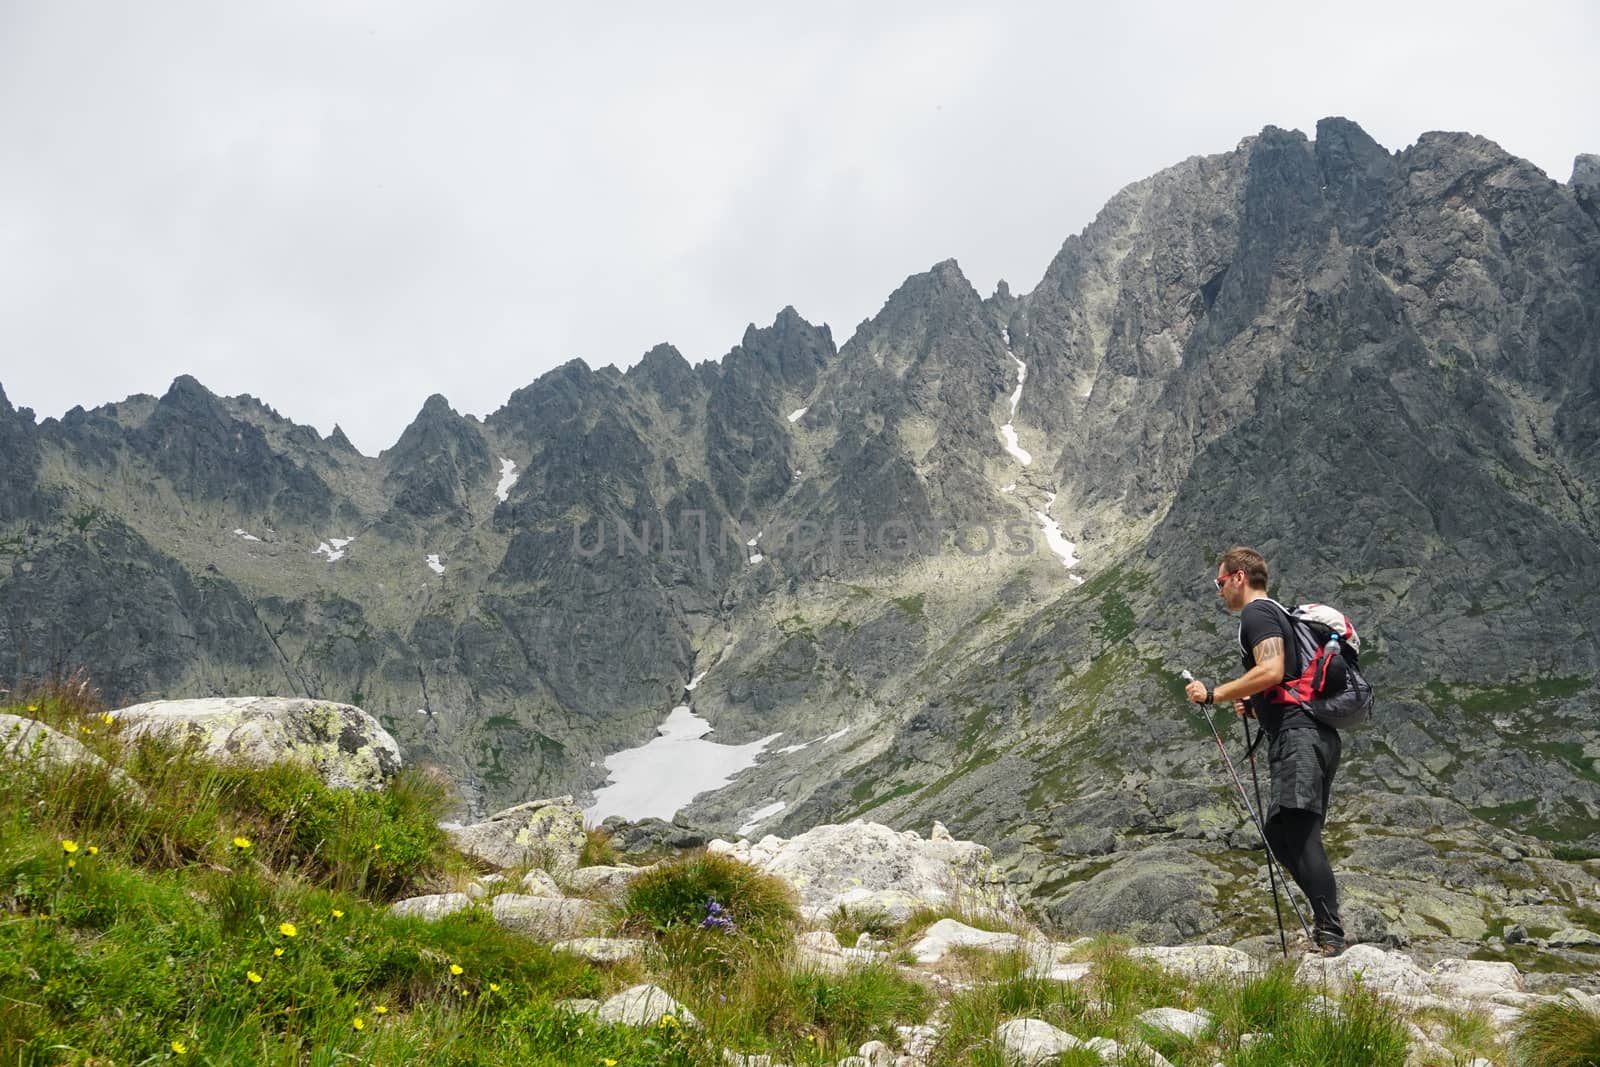 Man with hiking equipment walking in High Tatra mountain in Slovakia. Majestic View on the Lomnicky Stit in the background